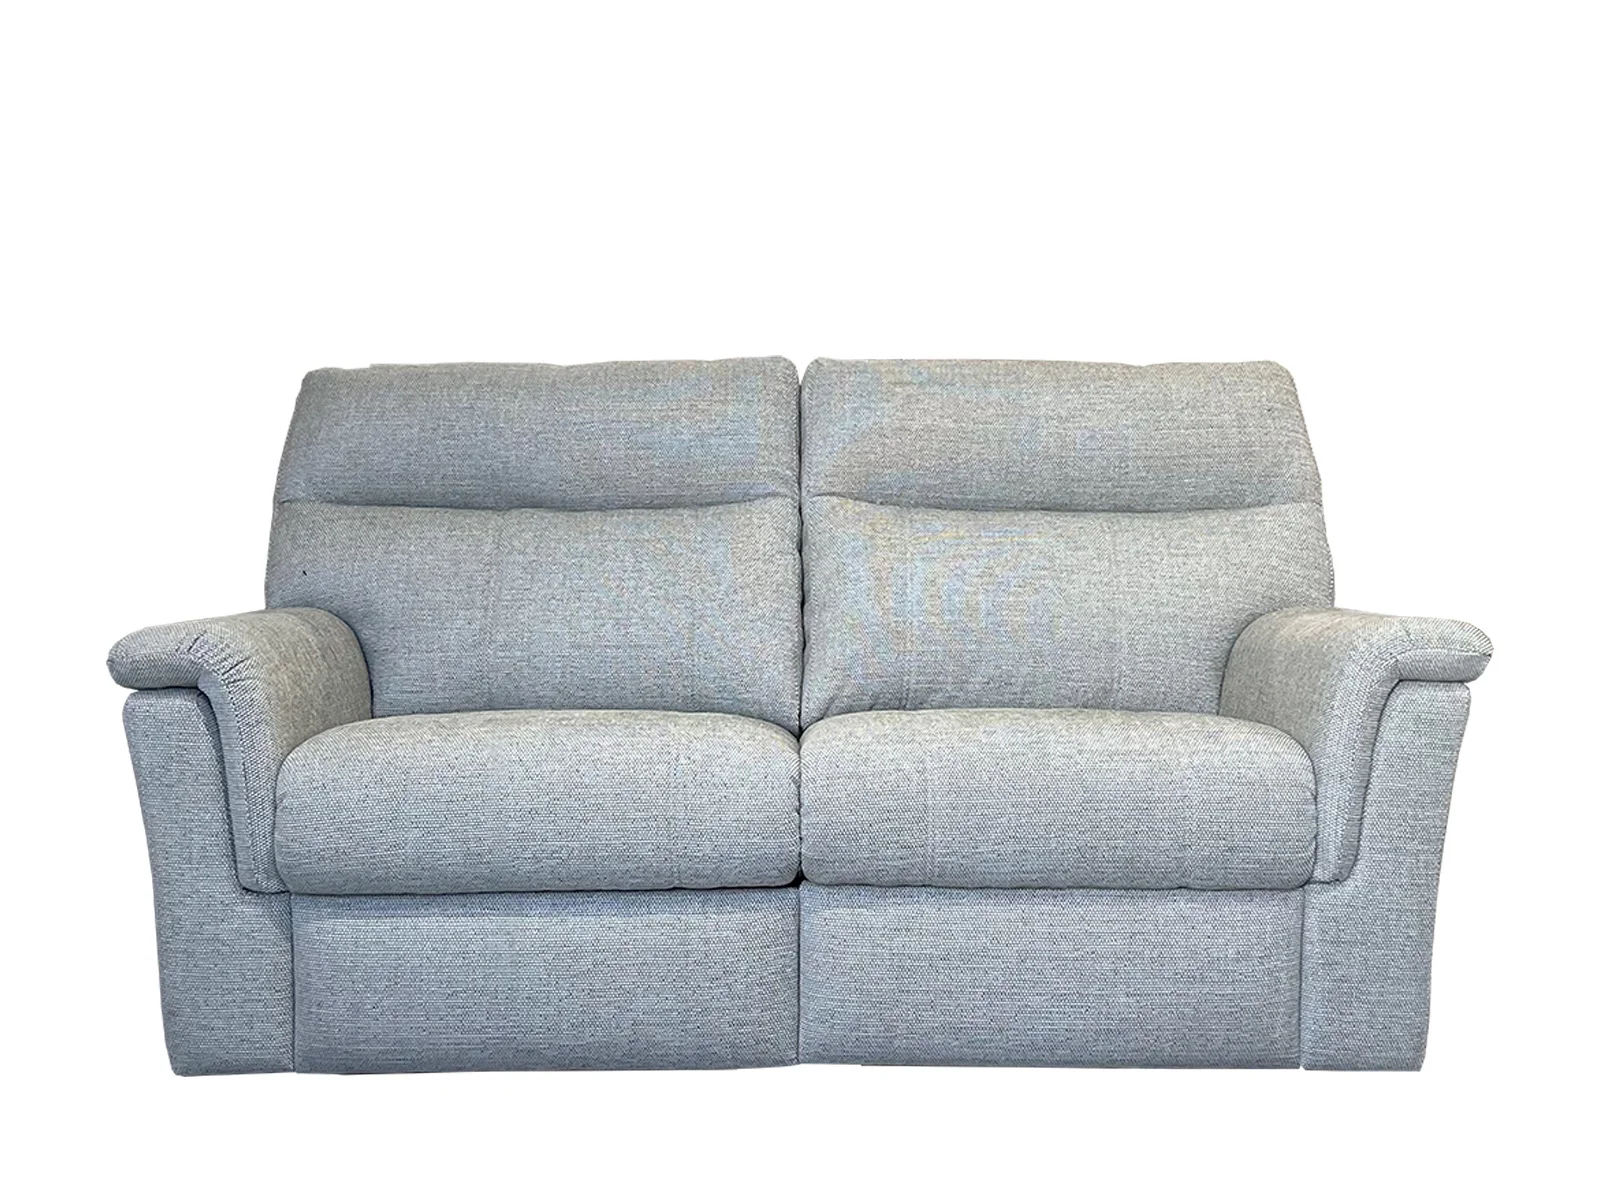 2 Seater Power Recliner Sofa With Adjustable Headrest And Lumbar Support